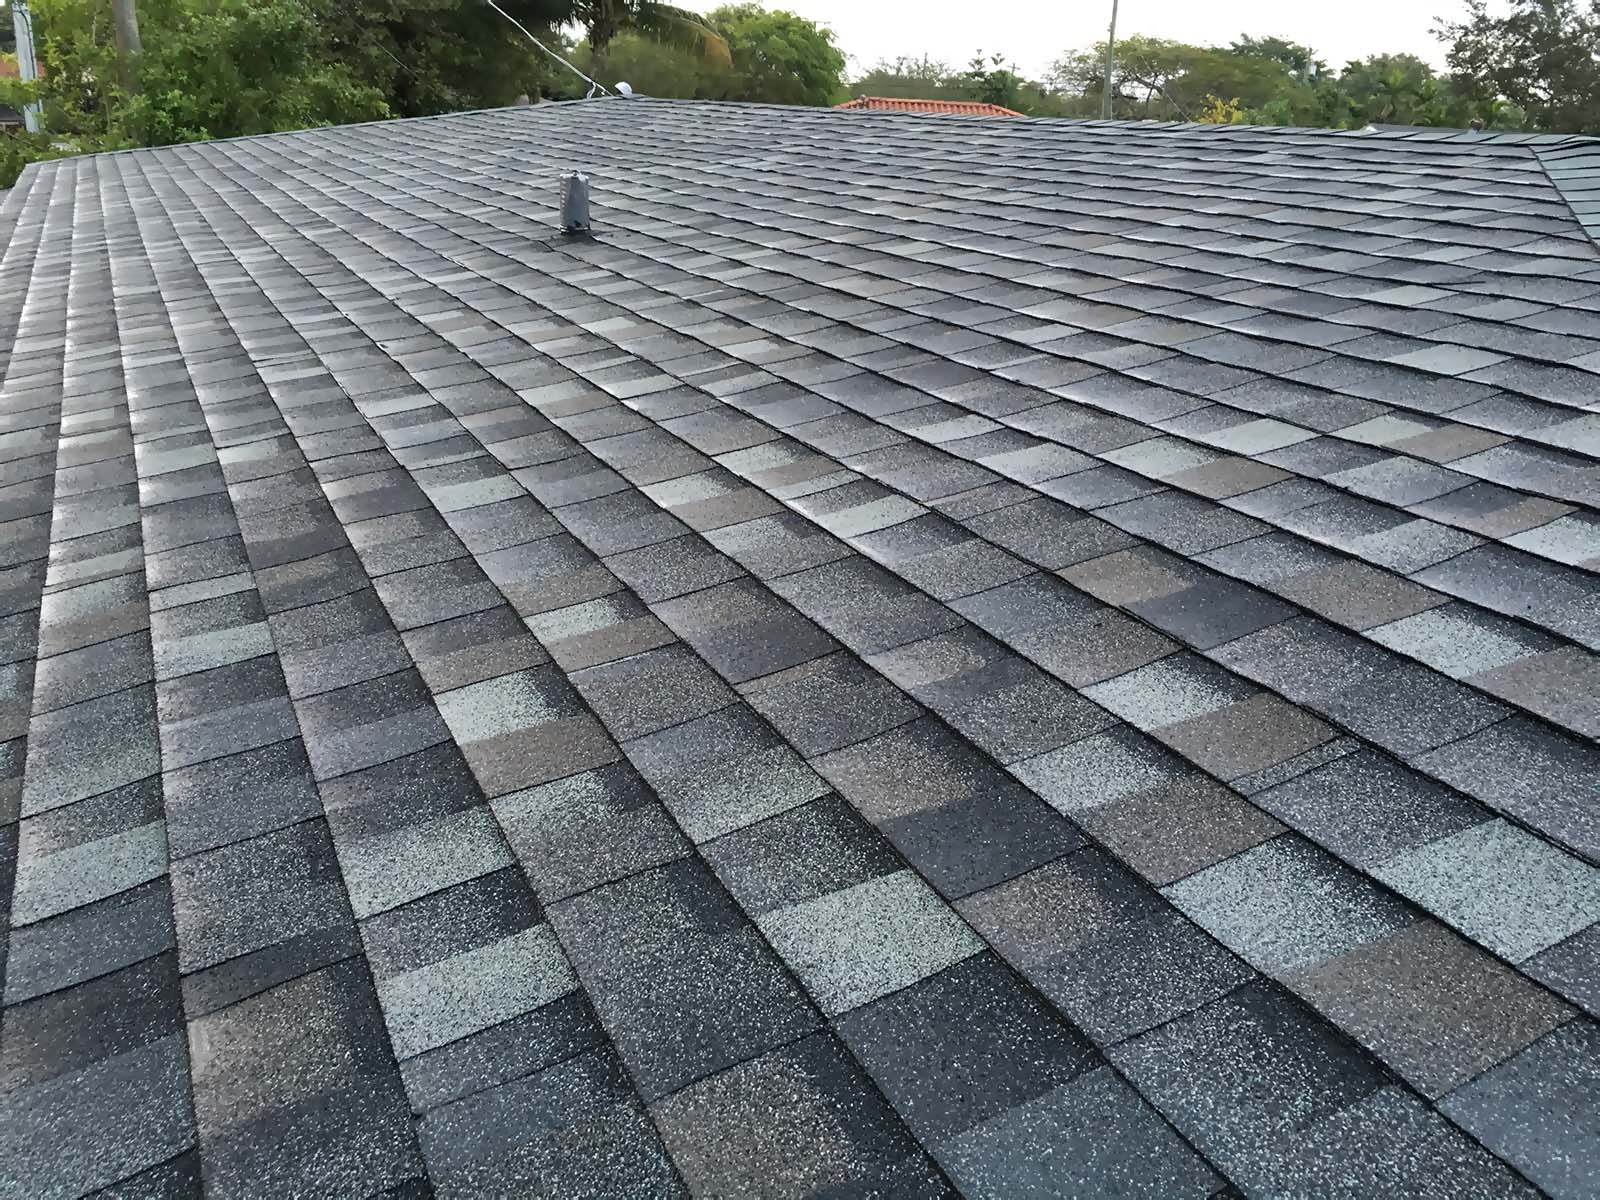 New Dimensional Shingle Roof in West Miami  Miami General Contractor